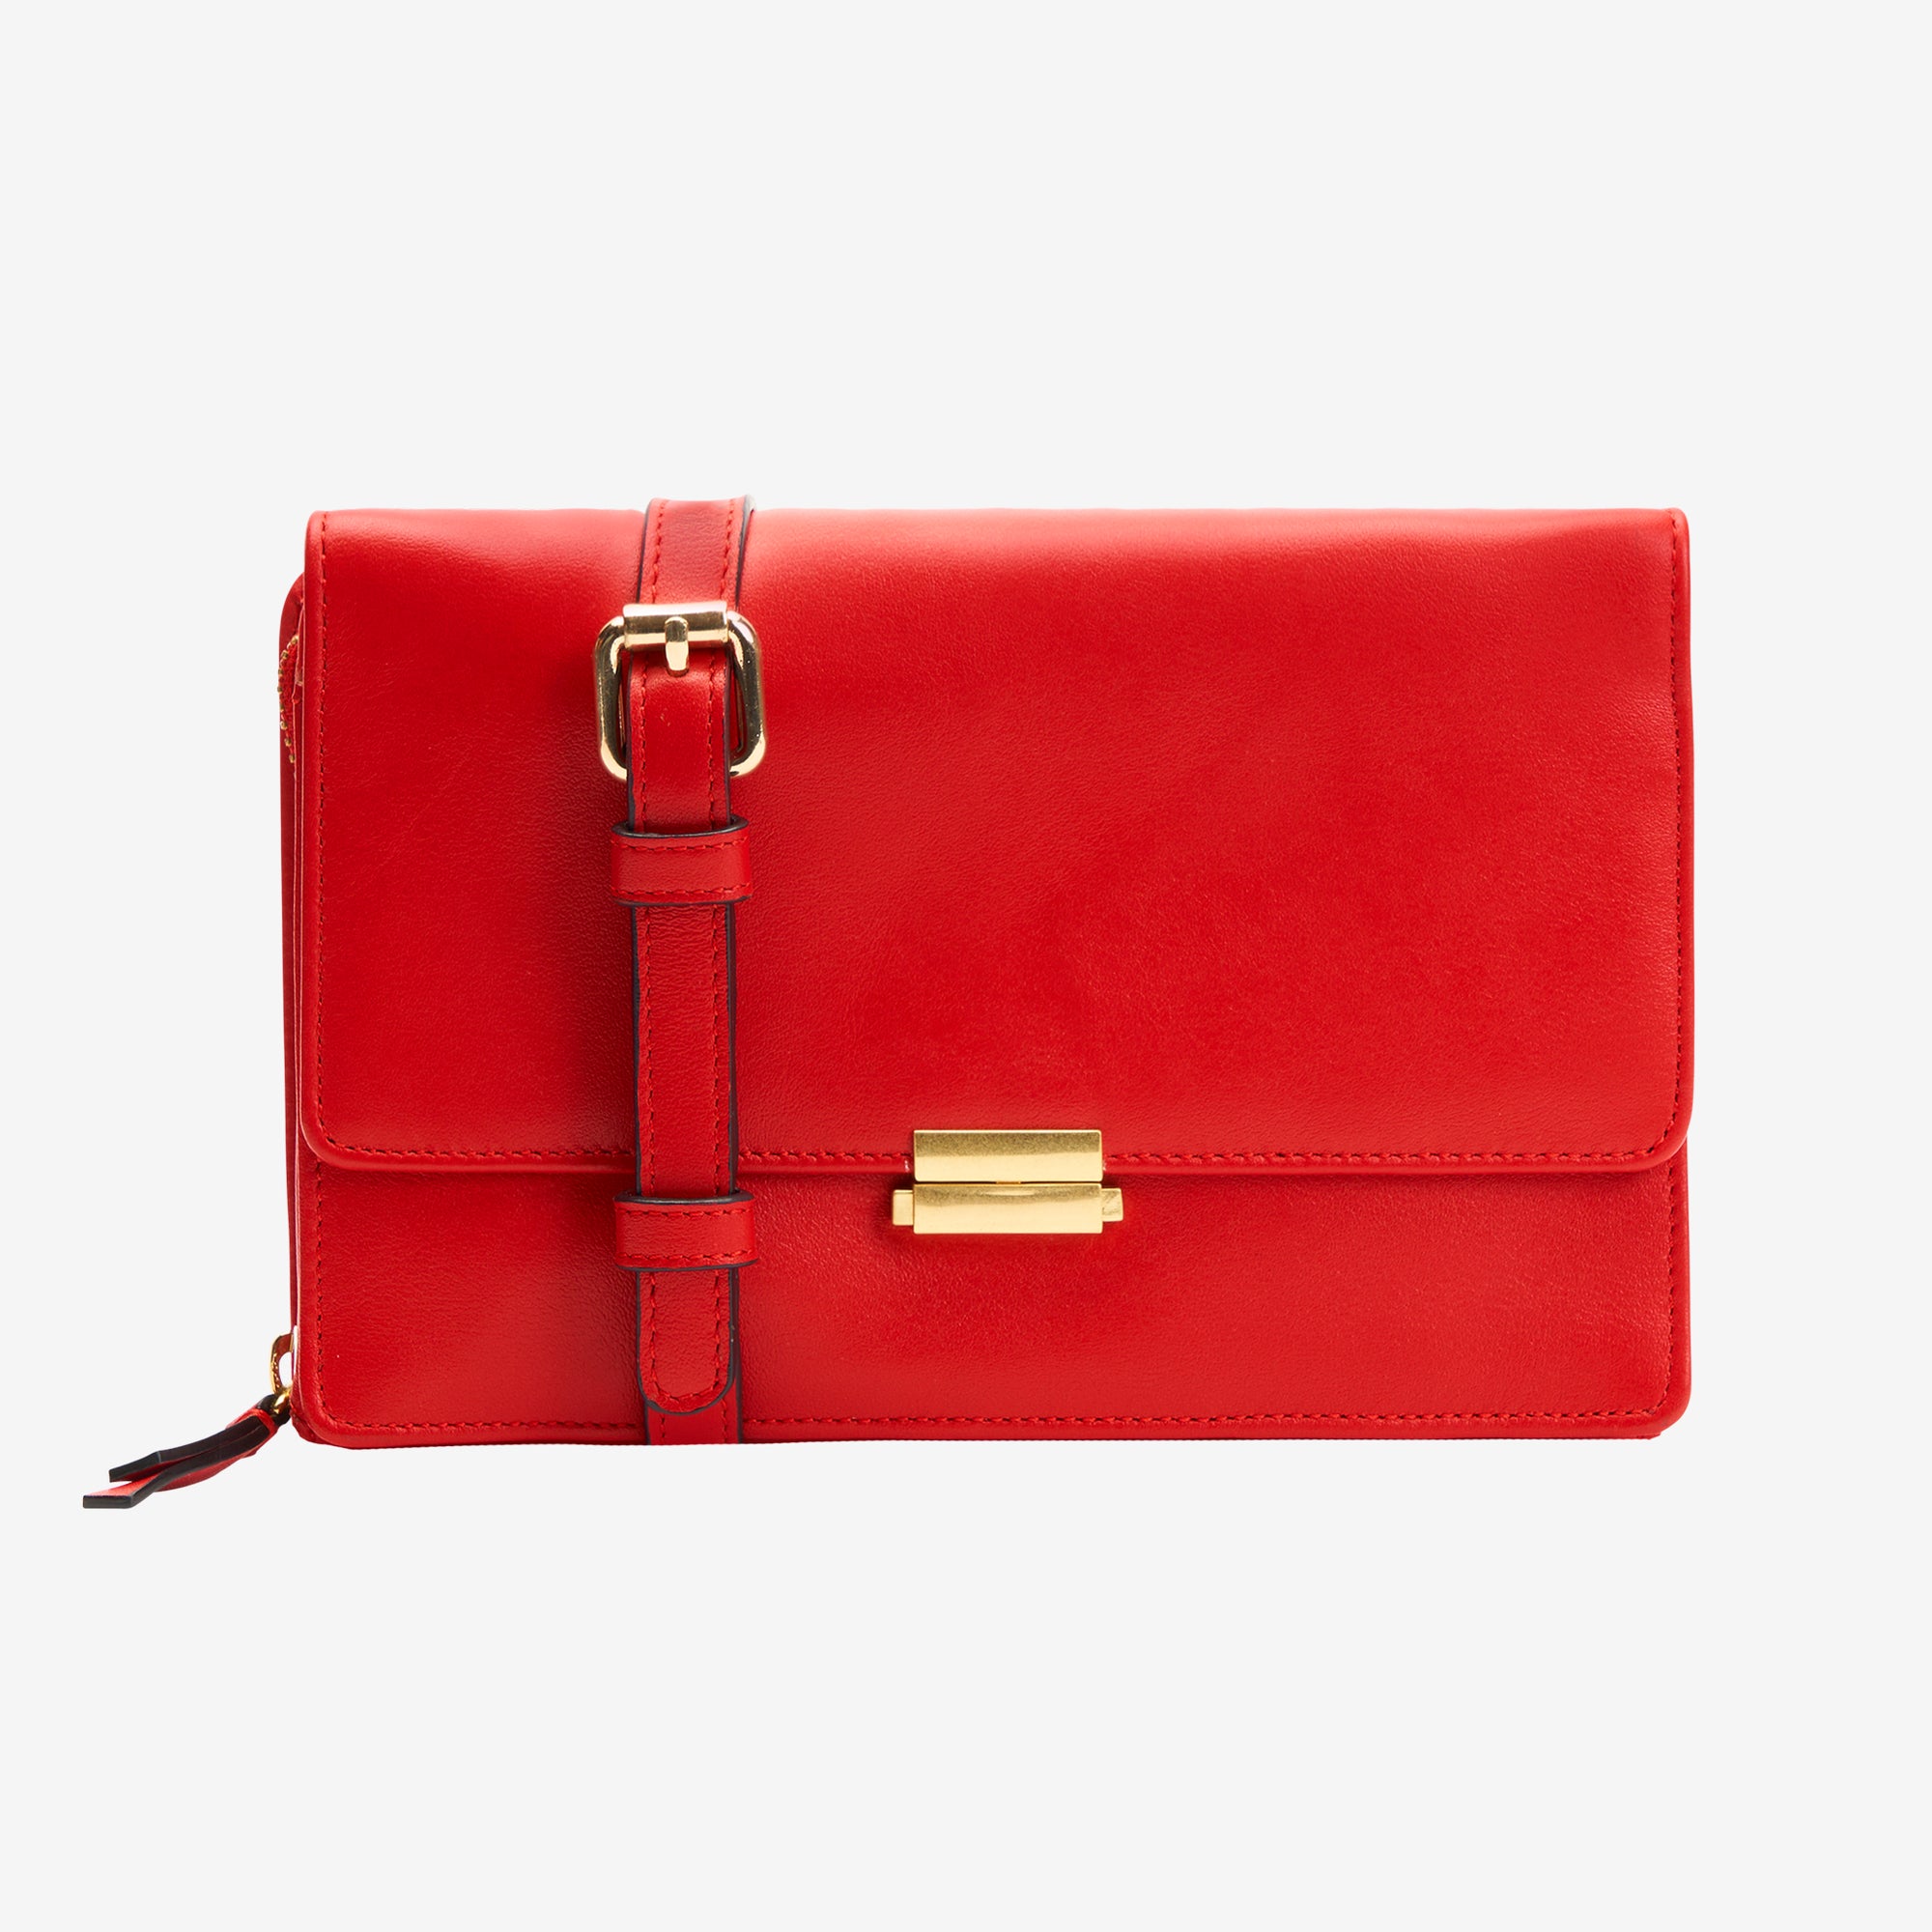     tusk-550-leather-mini-organizer-cross-body-bag-red-front